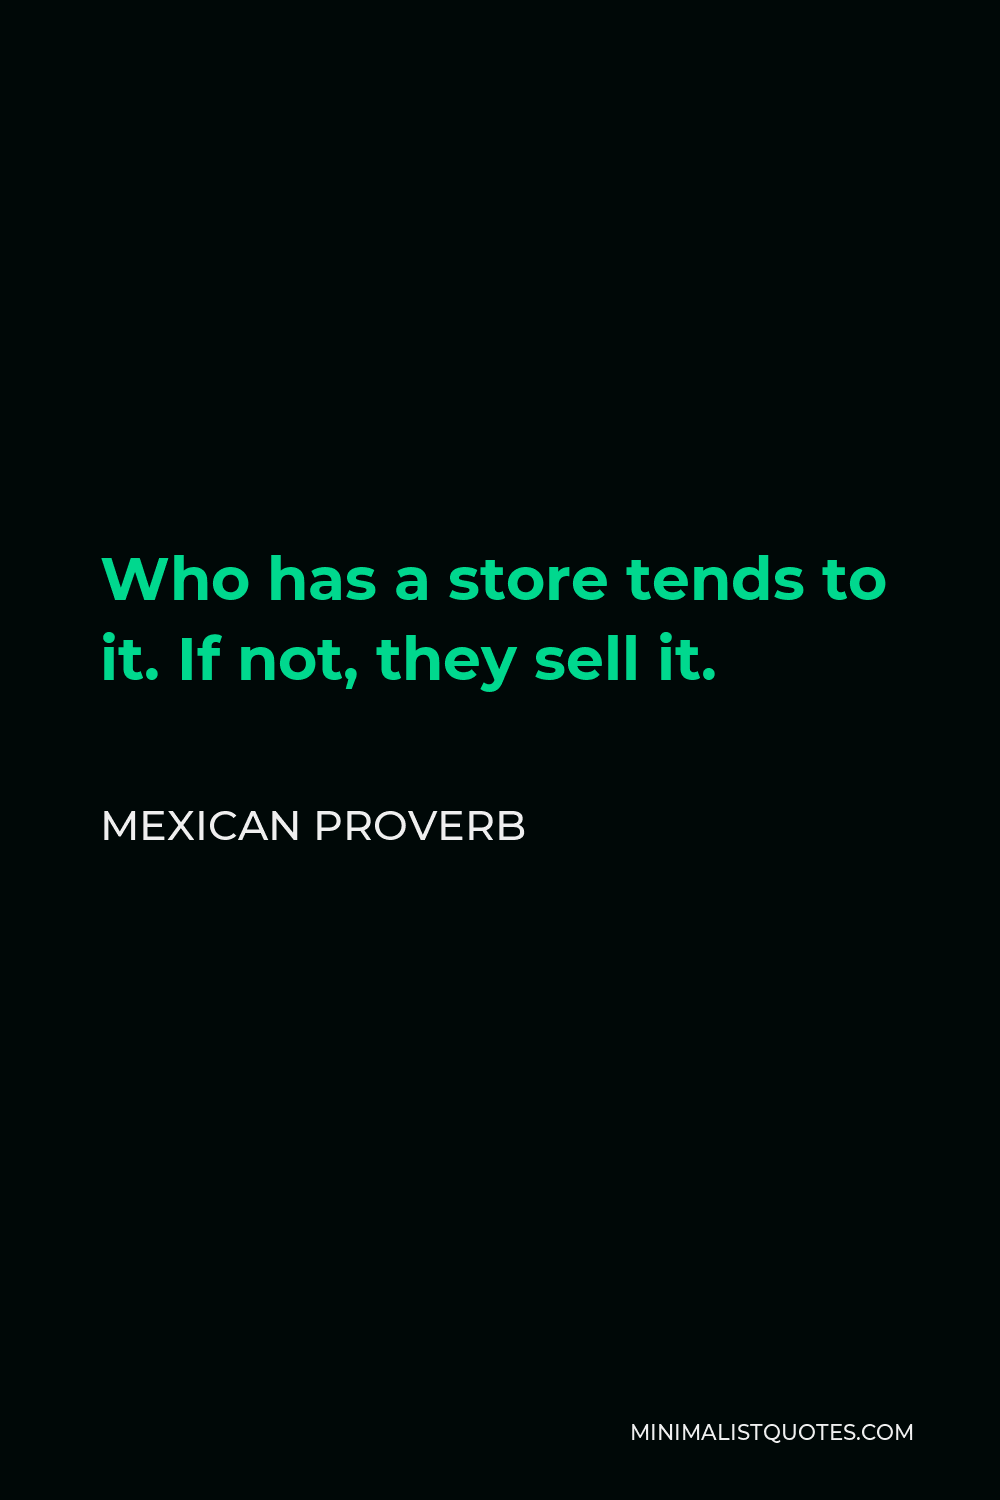 Mexican Proverb Quote - Who has a store tends to it. If not, they sell it.